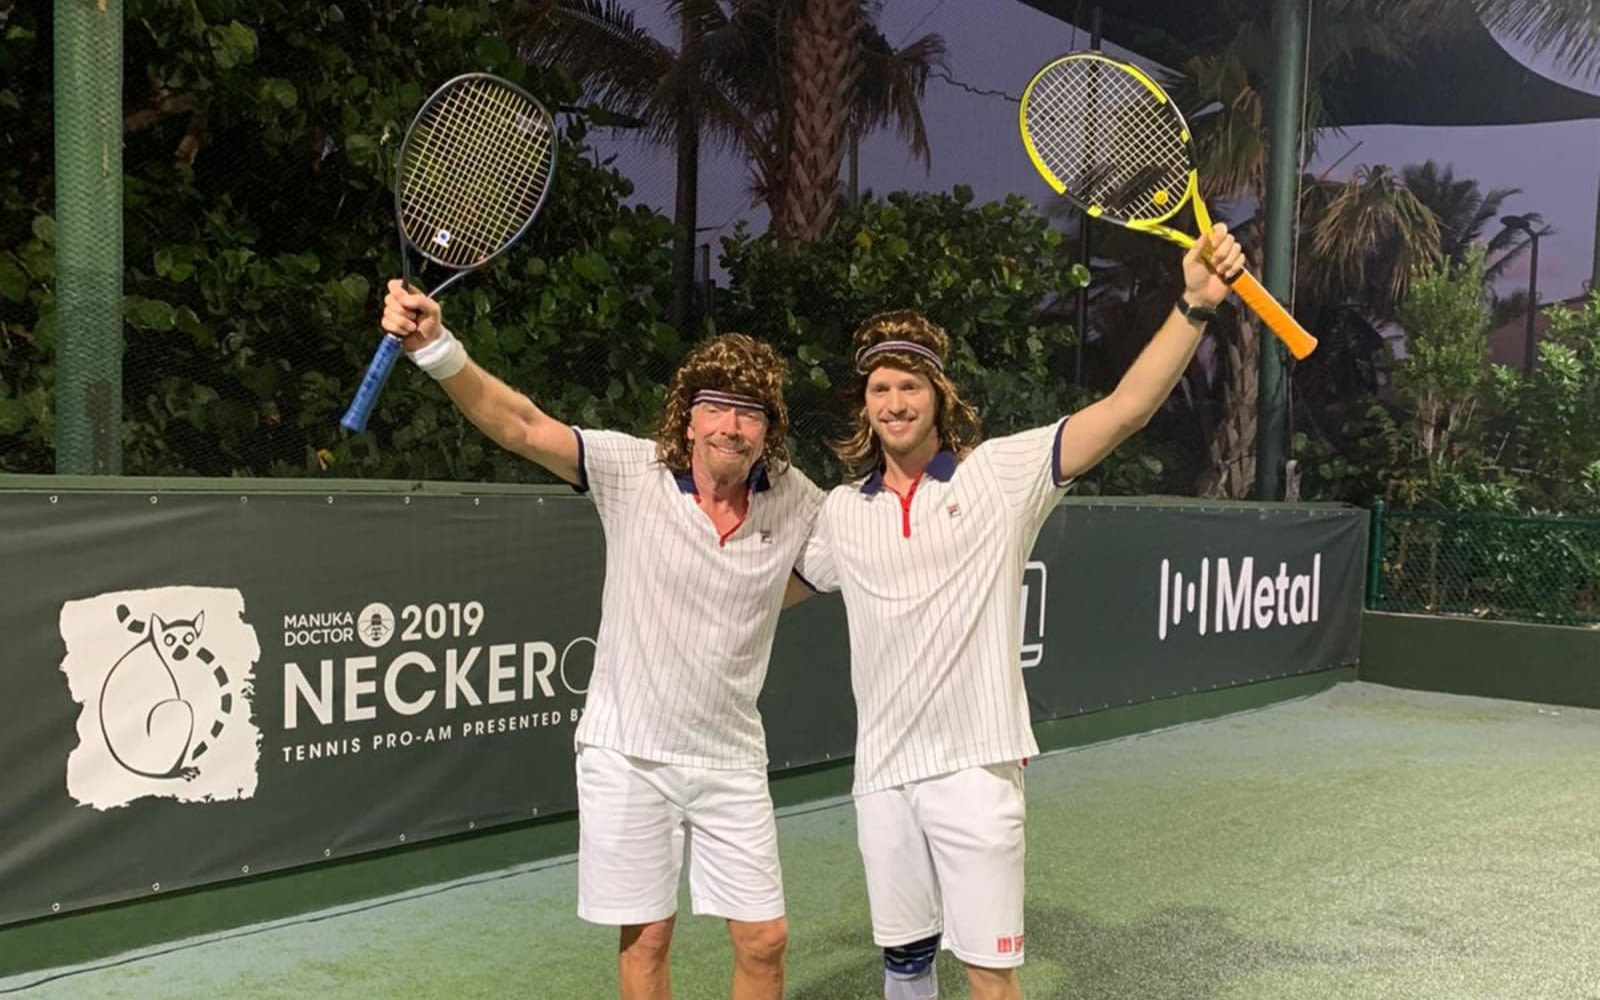 Richard and Sam Branson in matching Bjorn Borg outfits holding tennis rackets